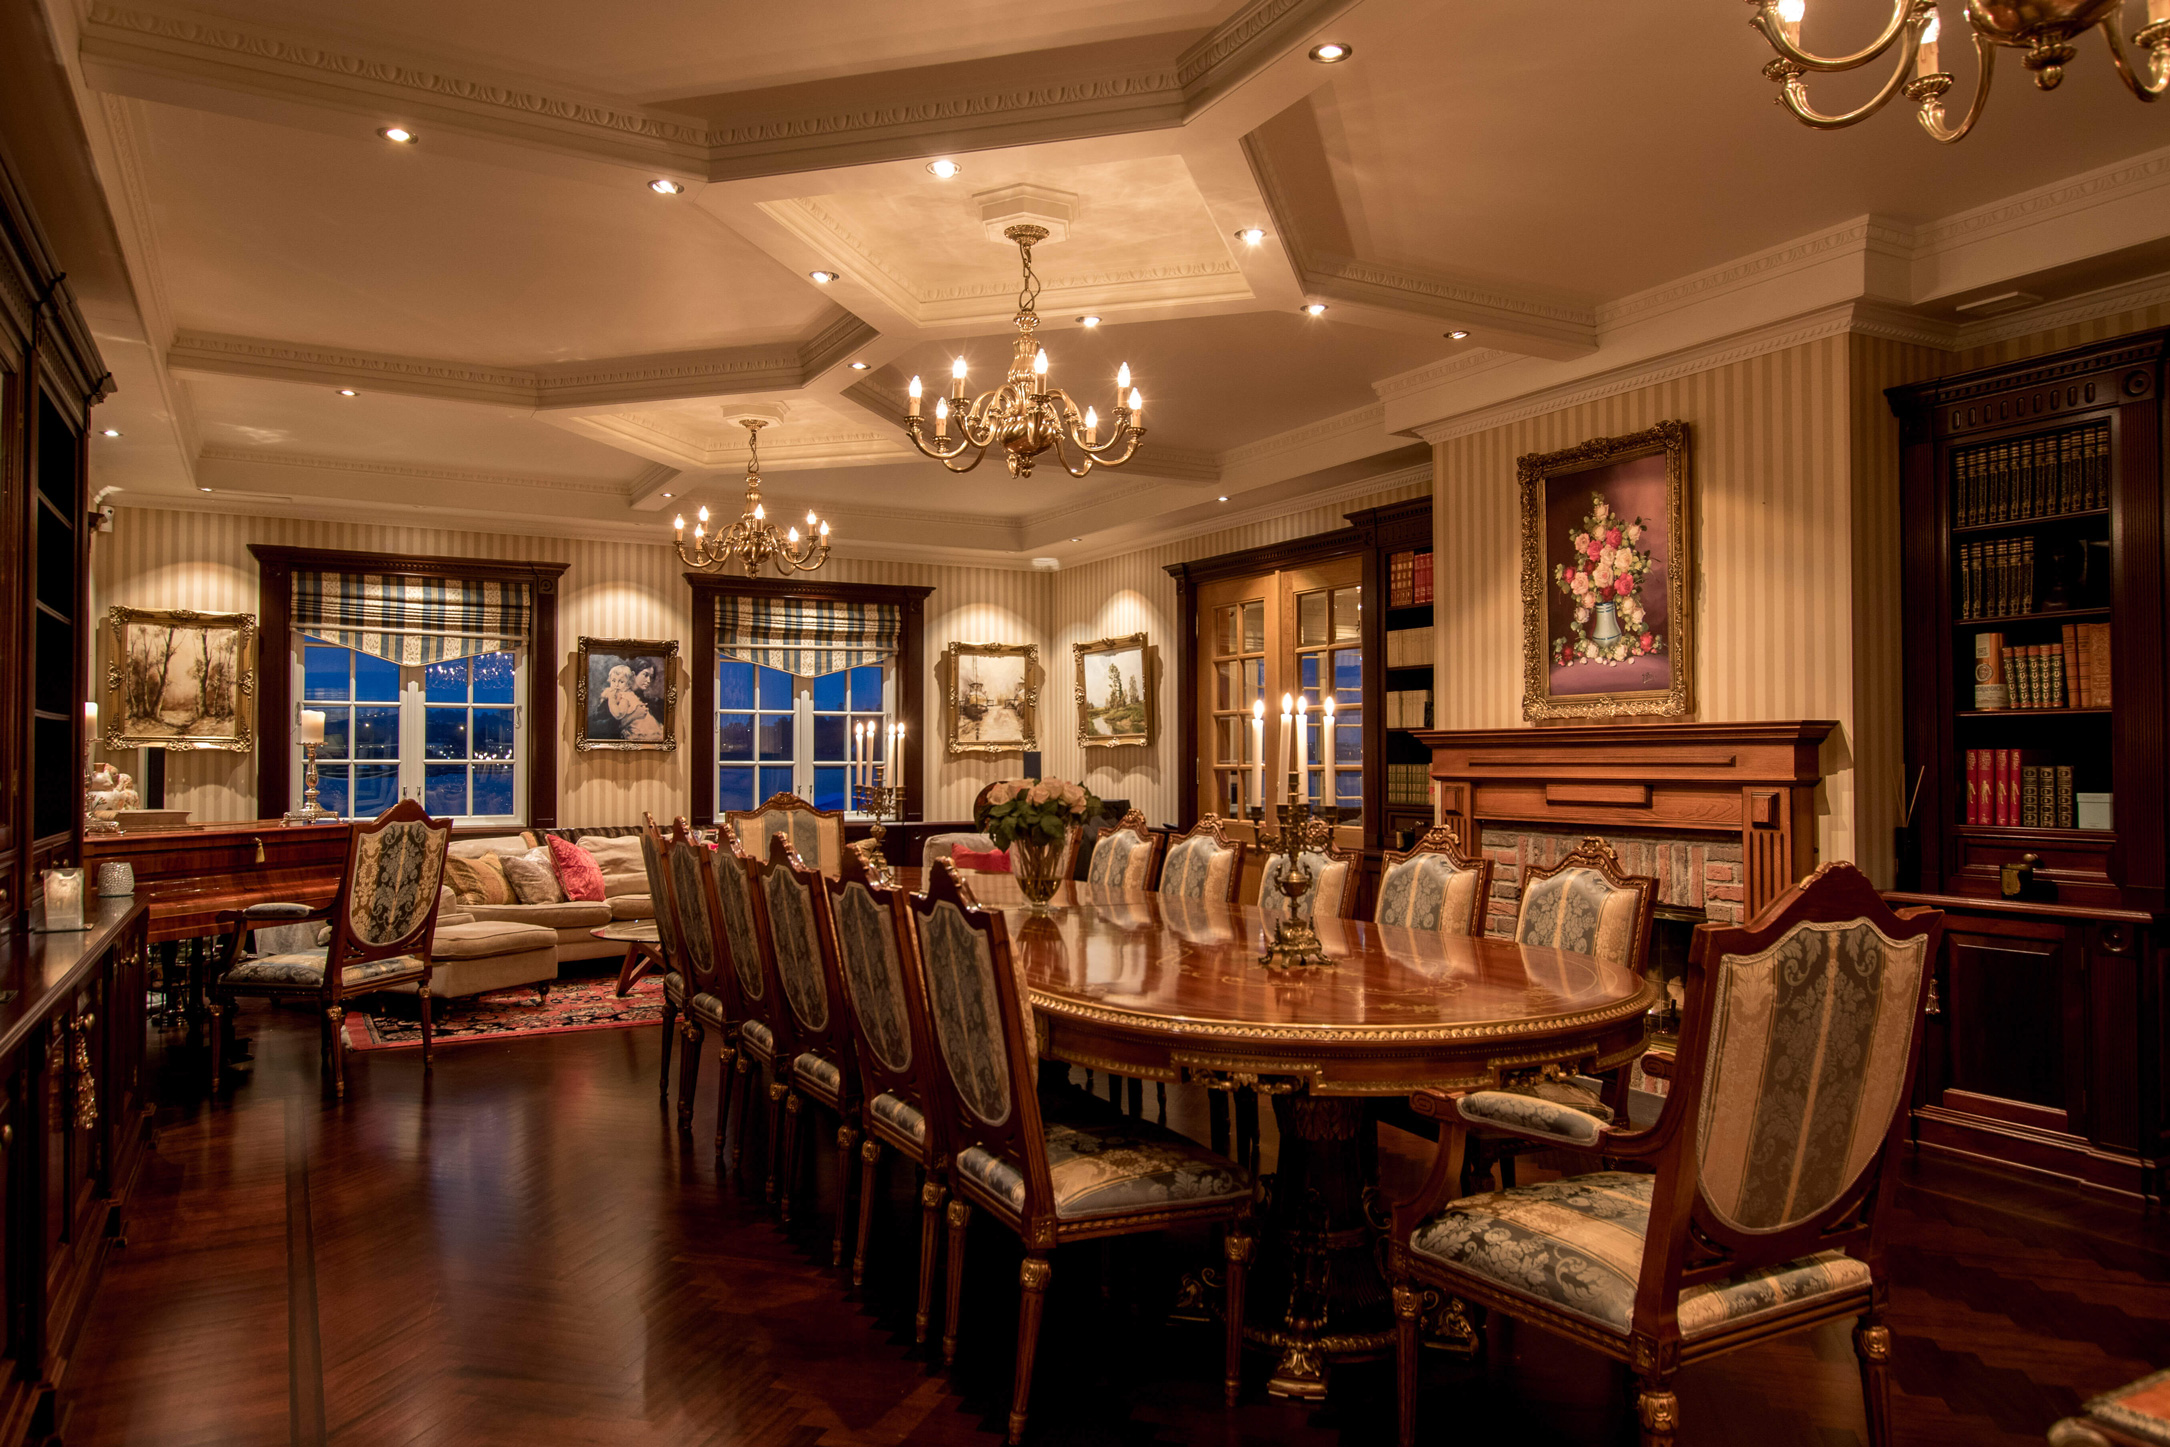 Wine, dine, entertain or invite business associates to a meeting in exceptional surroundings.